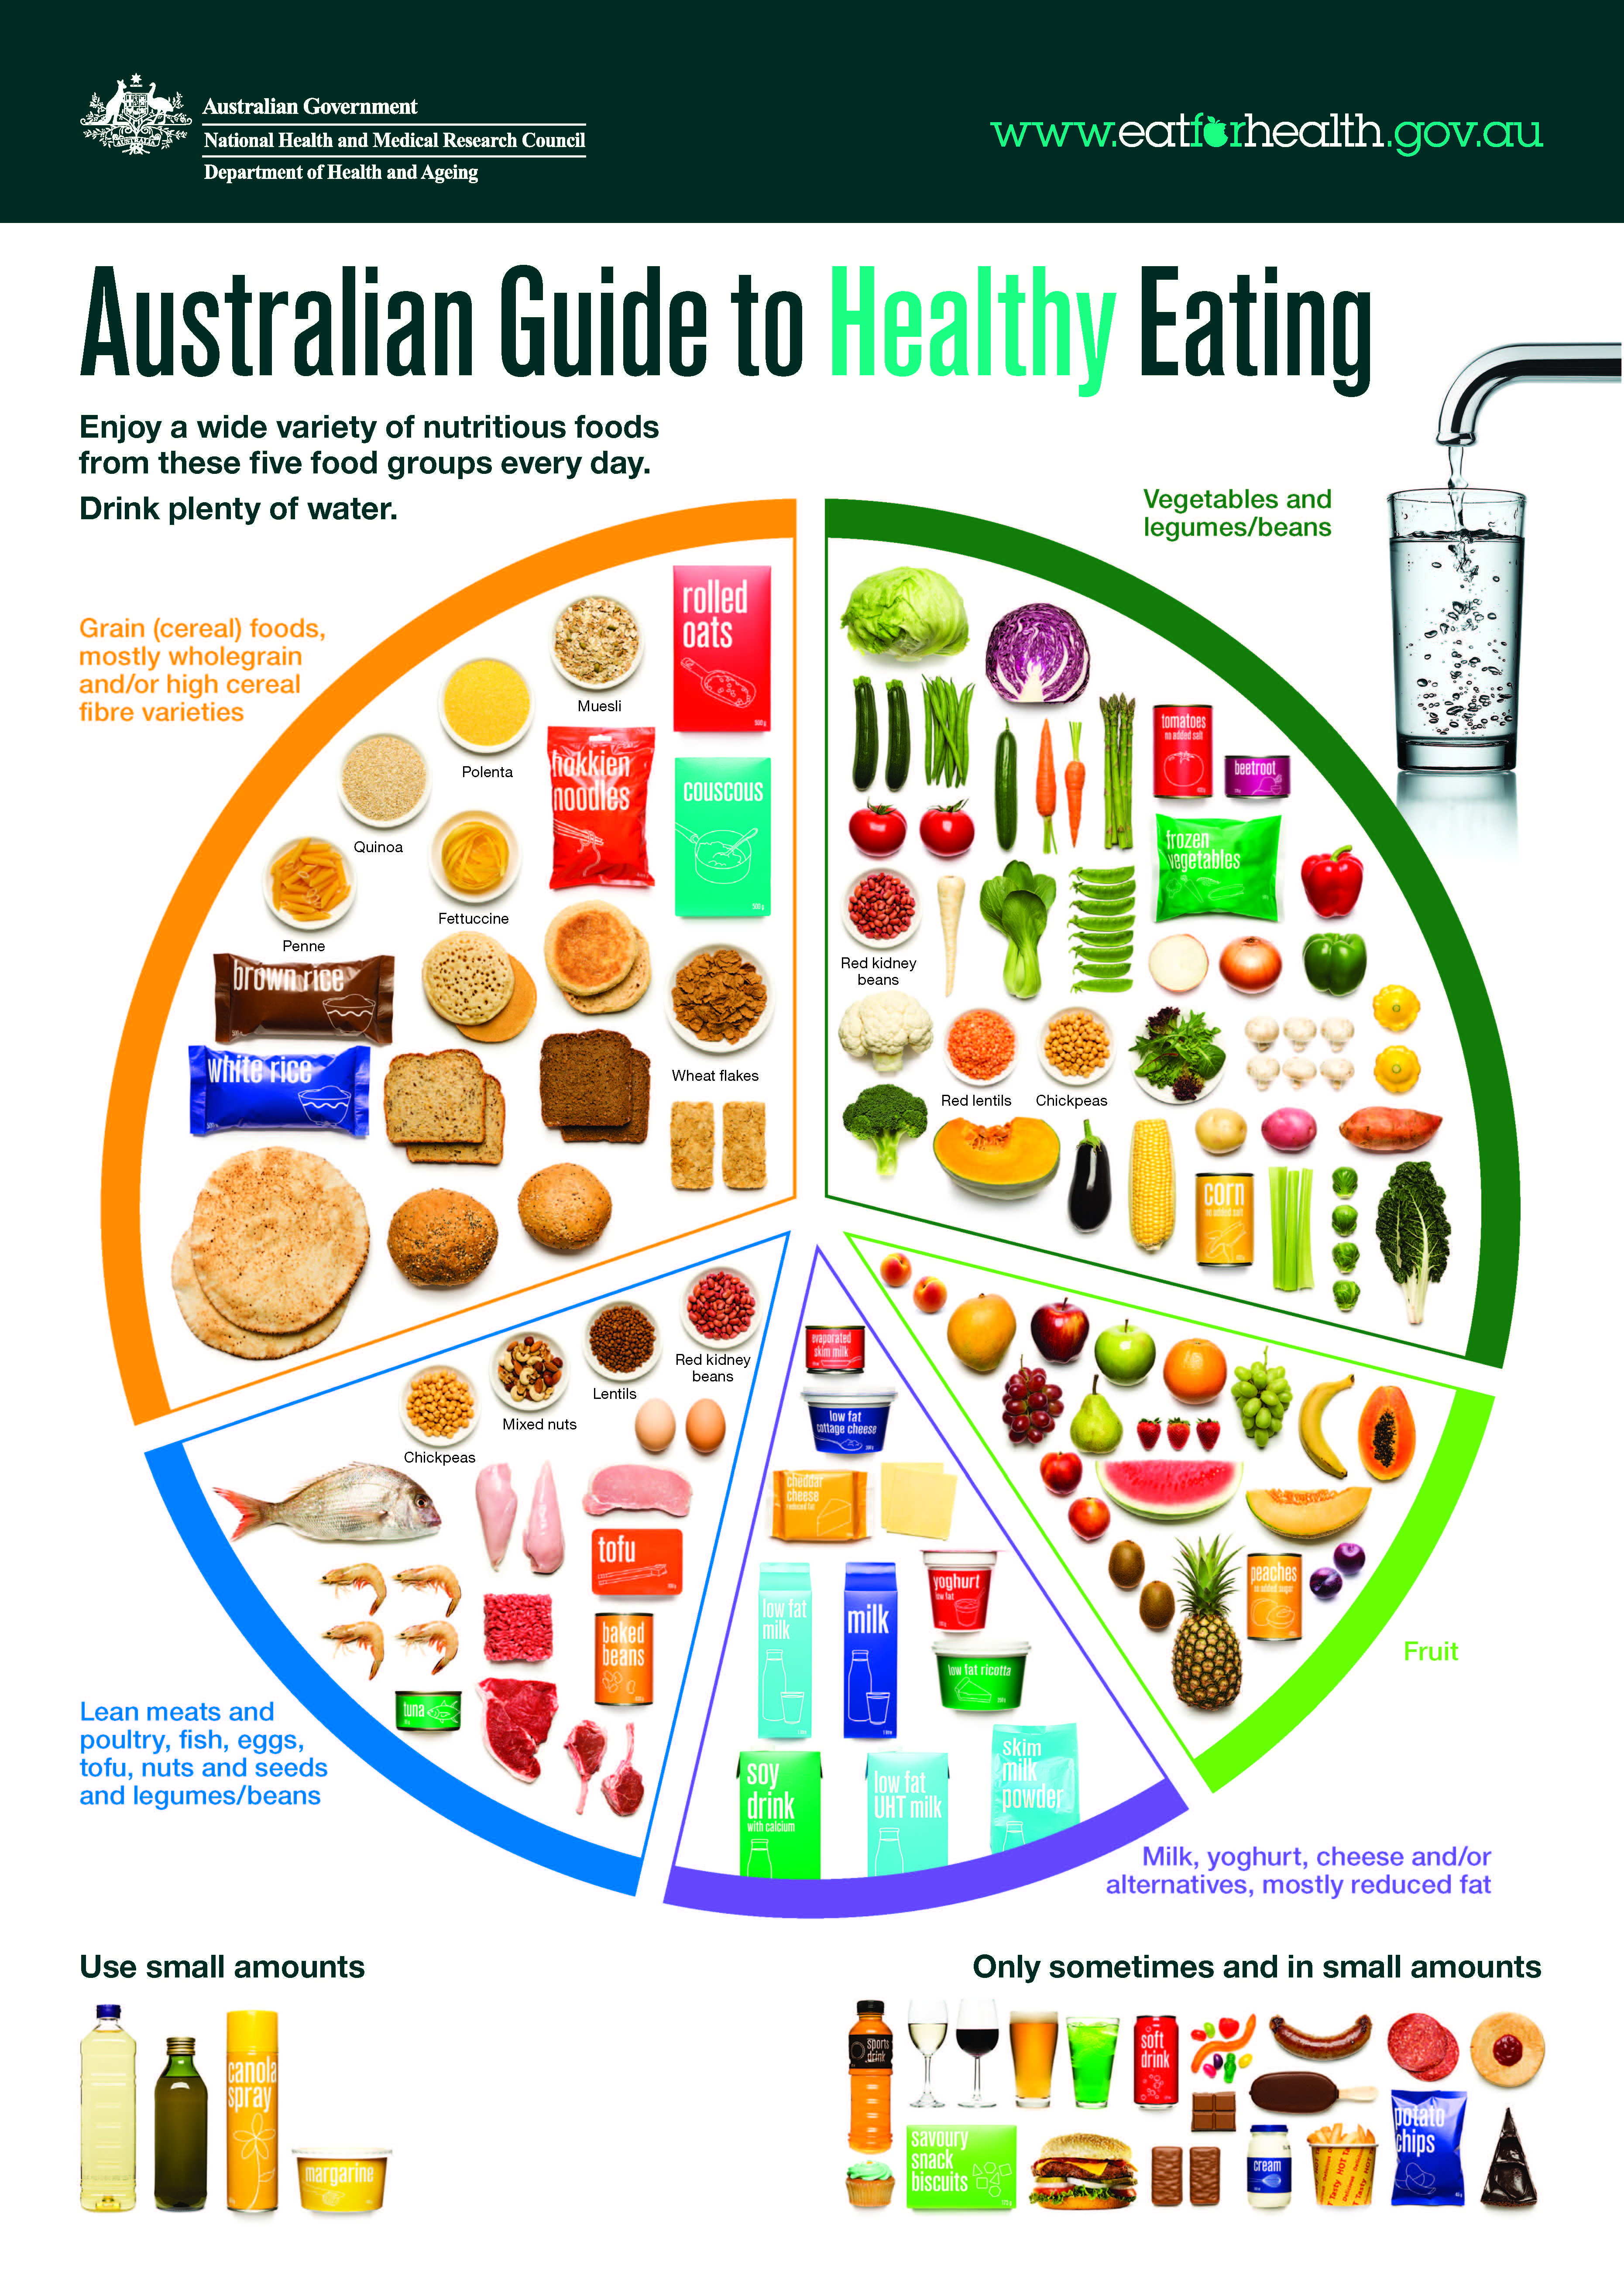 Circular diagram broken into sections showing healthy food group and sometimes foods. The Australian Government Australian Dietary Guidelines website provide full details.